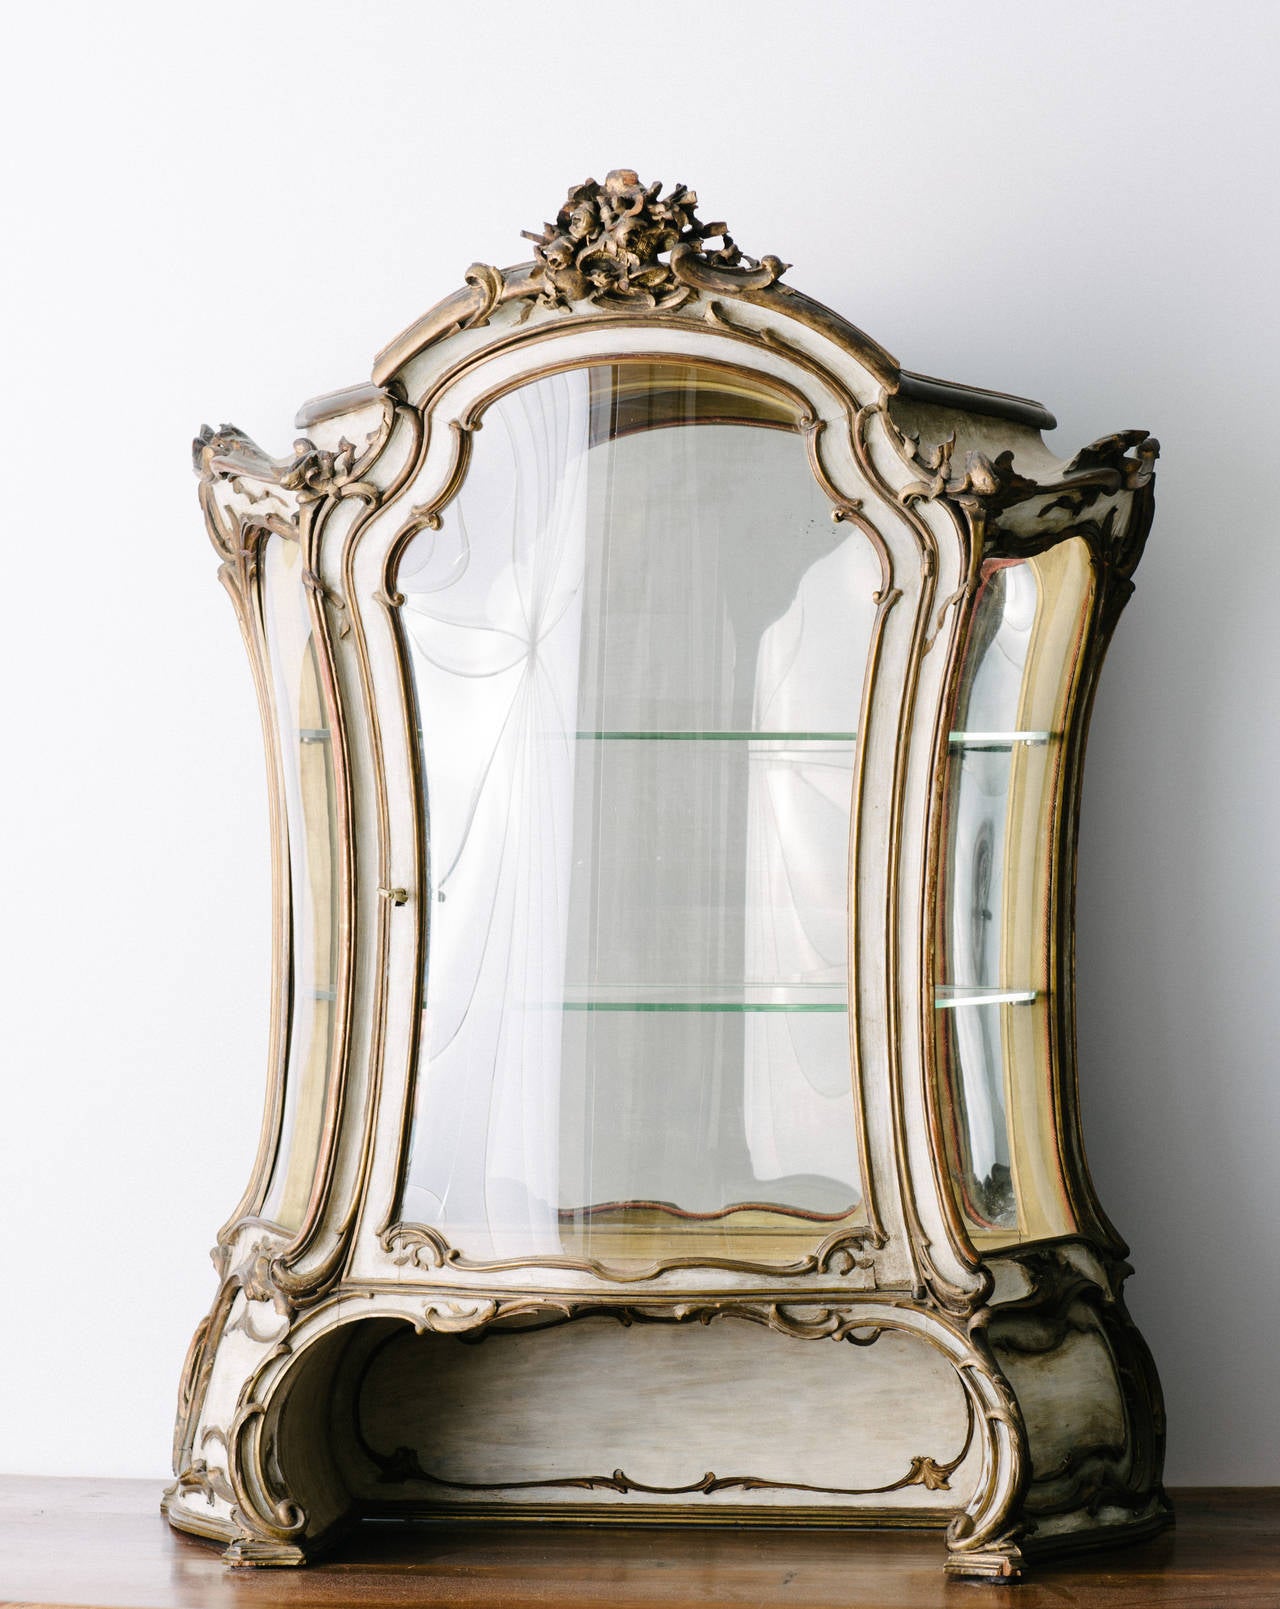 19th century French painted and giltwood vitrine with mirrored back and two glass shelves.